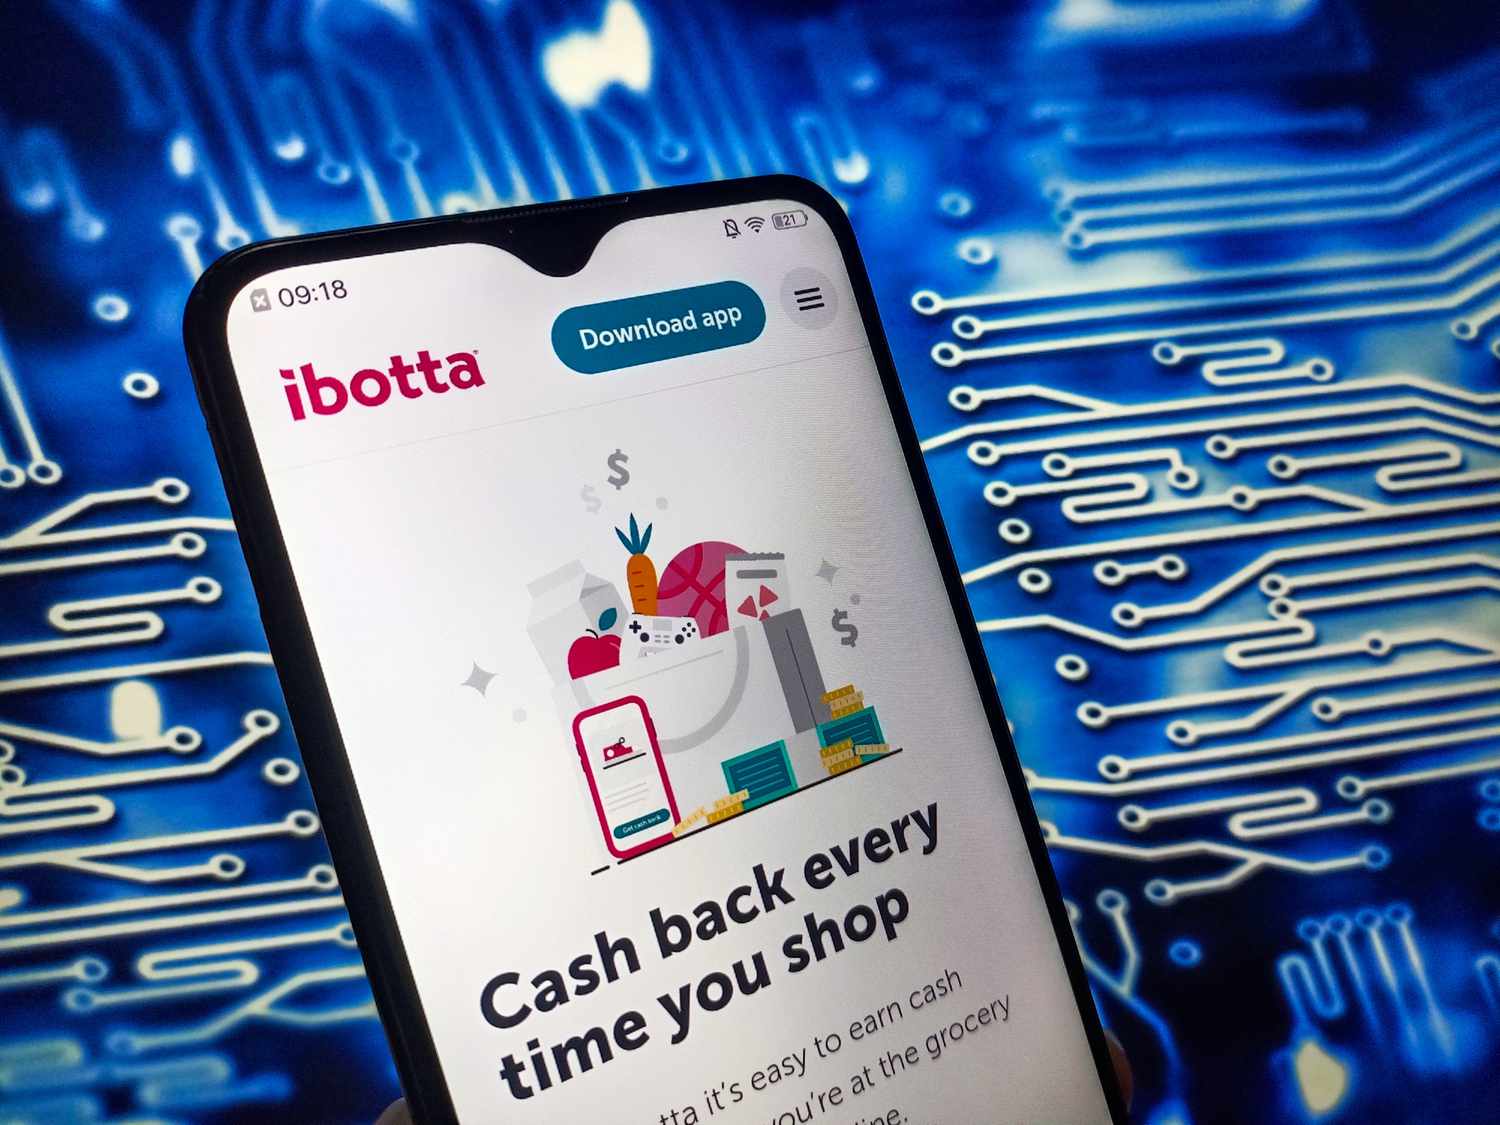 What You Need To Know About Walmart-Backed Ibotta’s IPO Plan [Video]